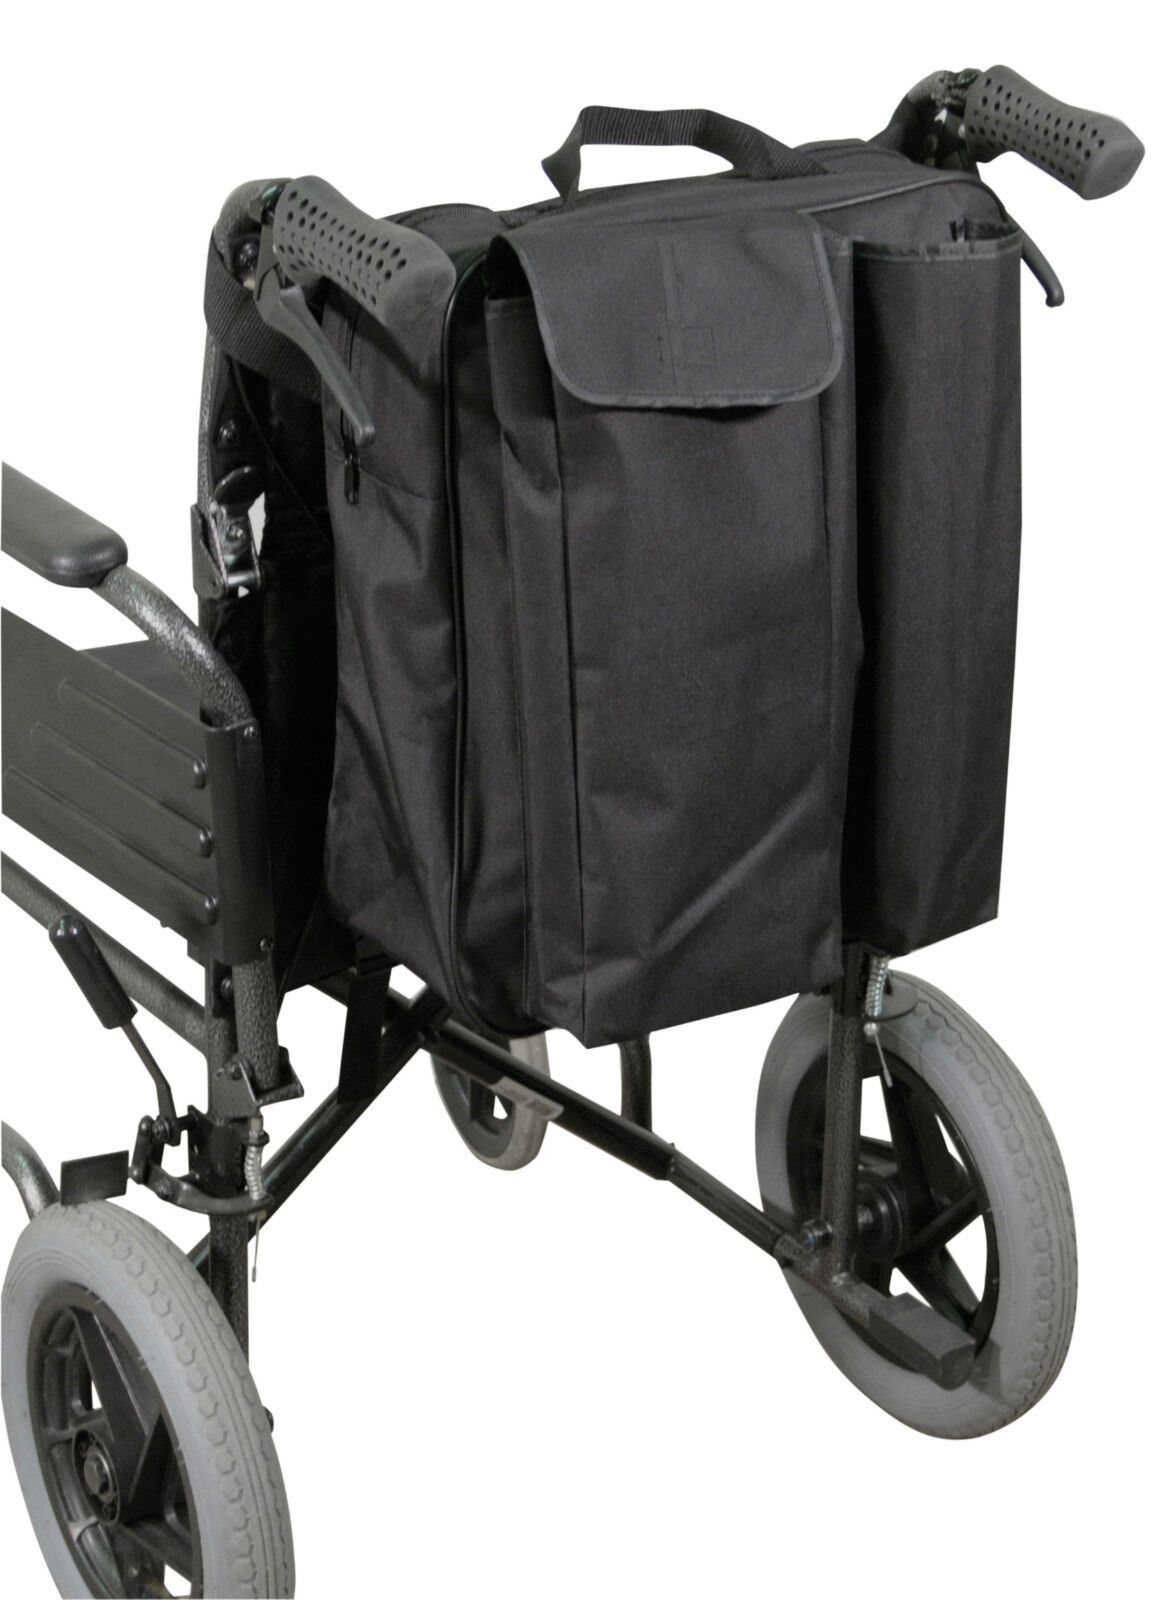 Urge medical Portable Folding Wheelchair, Travel Wheelchair with India |  Ubuy